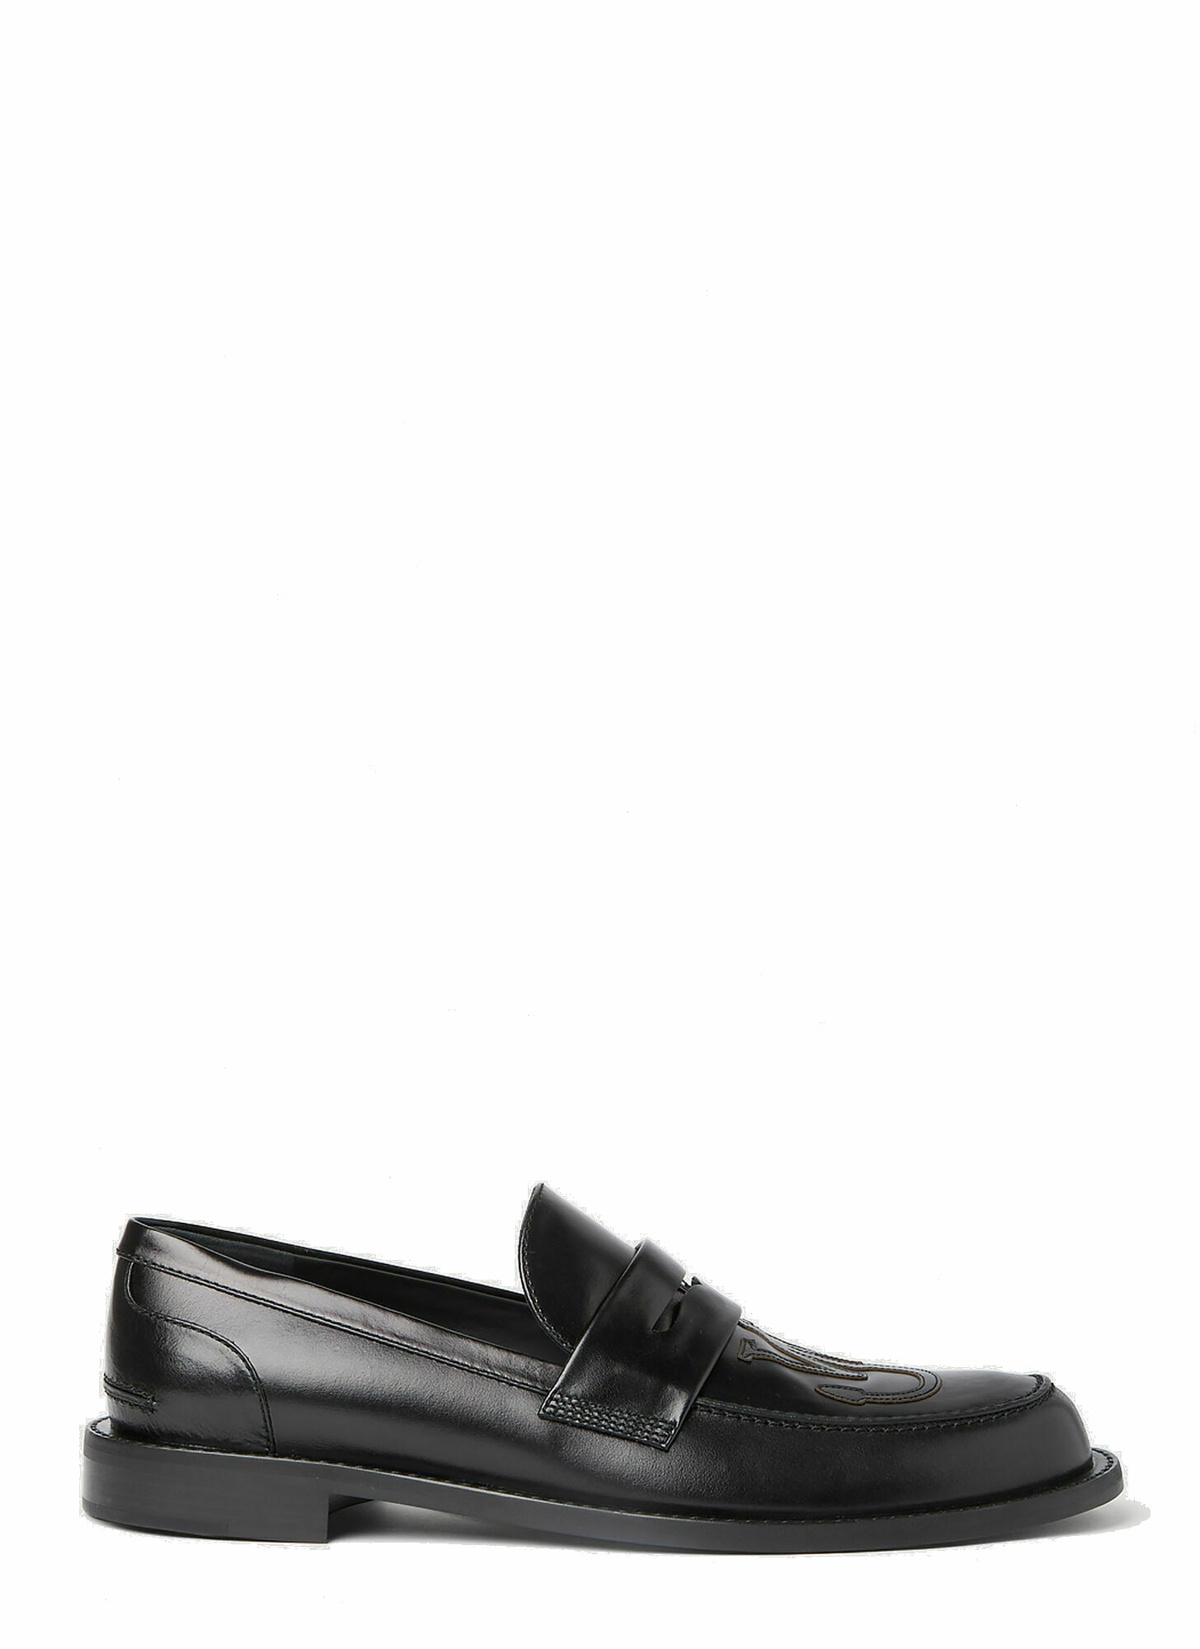 JW Anderson - Anchor Logo Loafers in Black JW Anderson